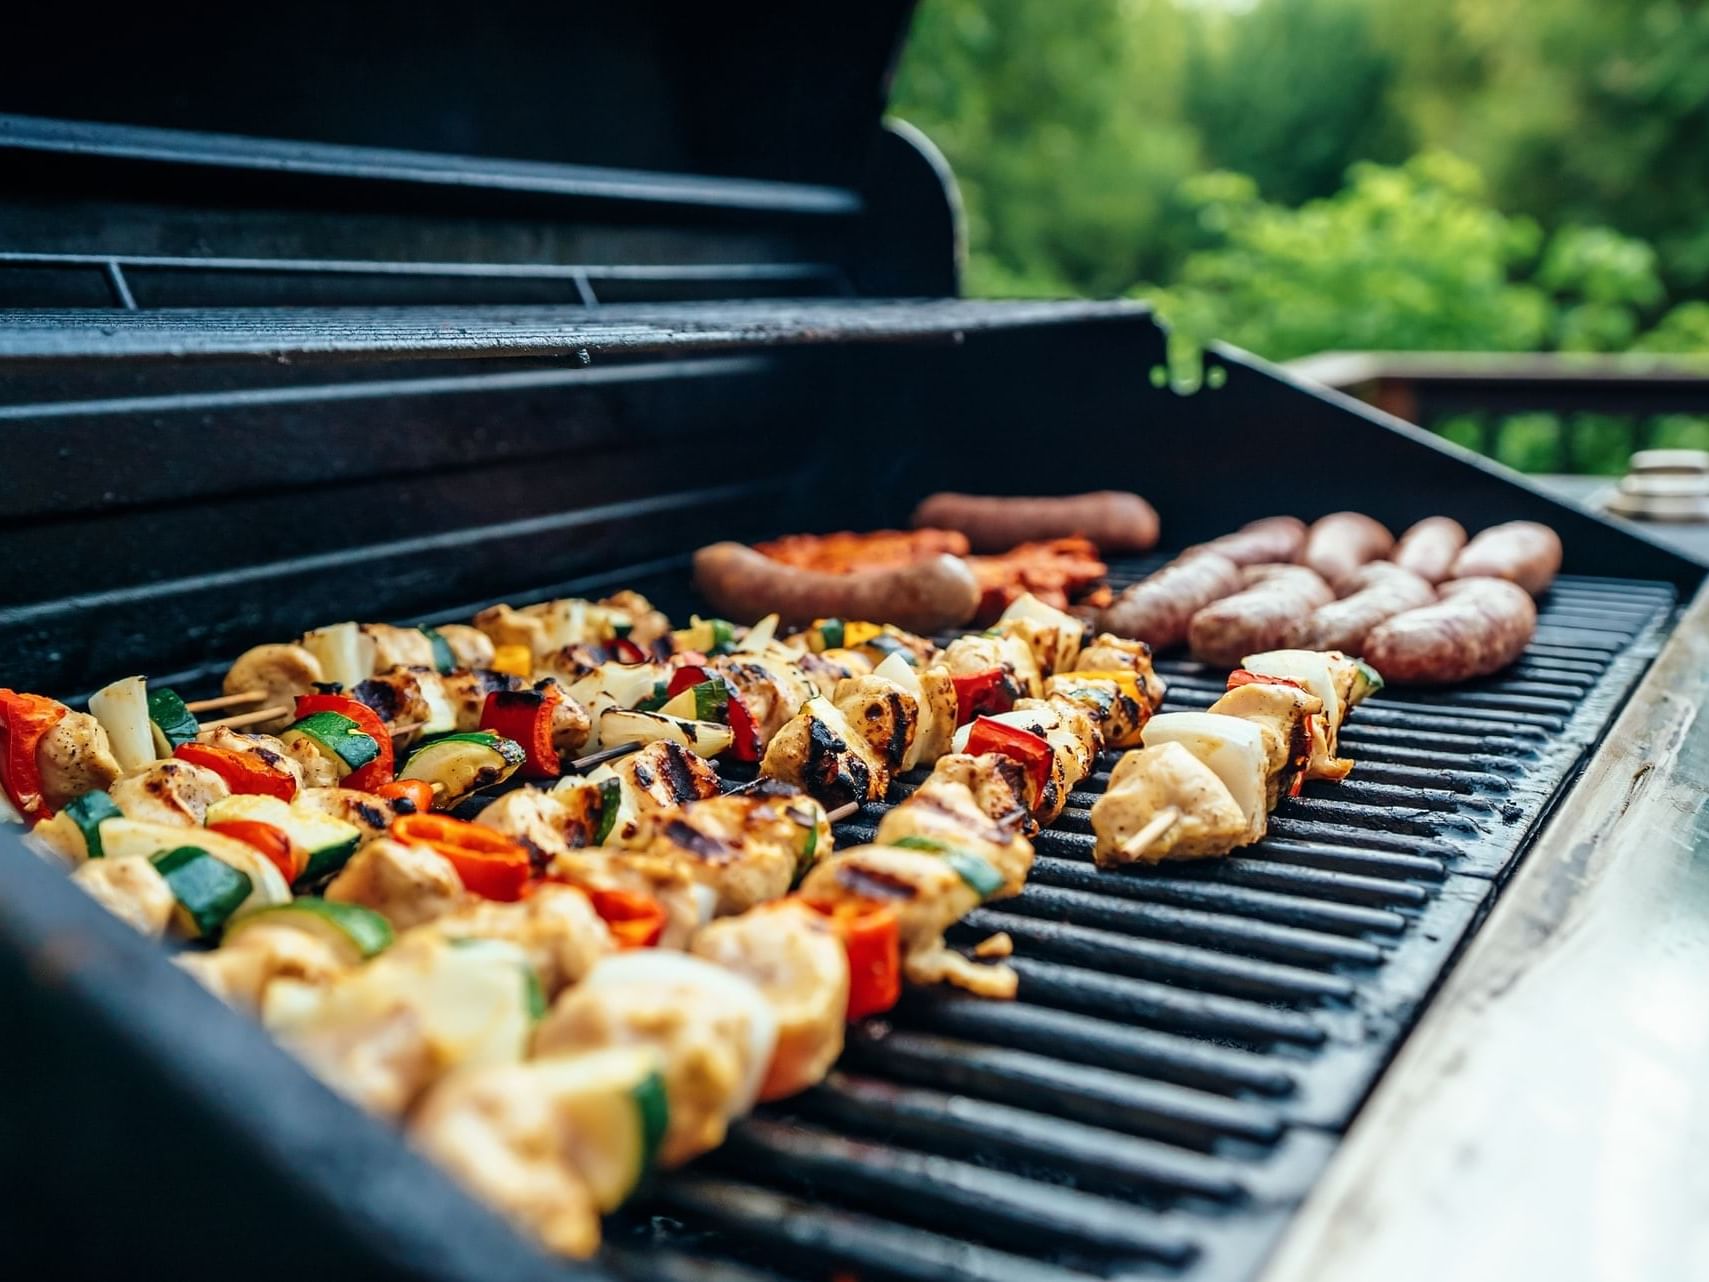 A barbeque grill with meat kebabs, vegetable kebabs and sausages